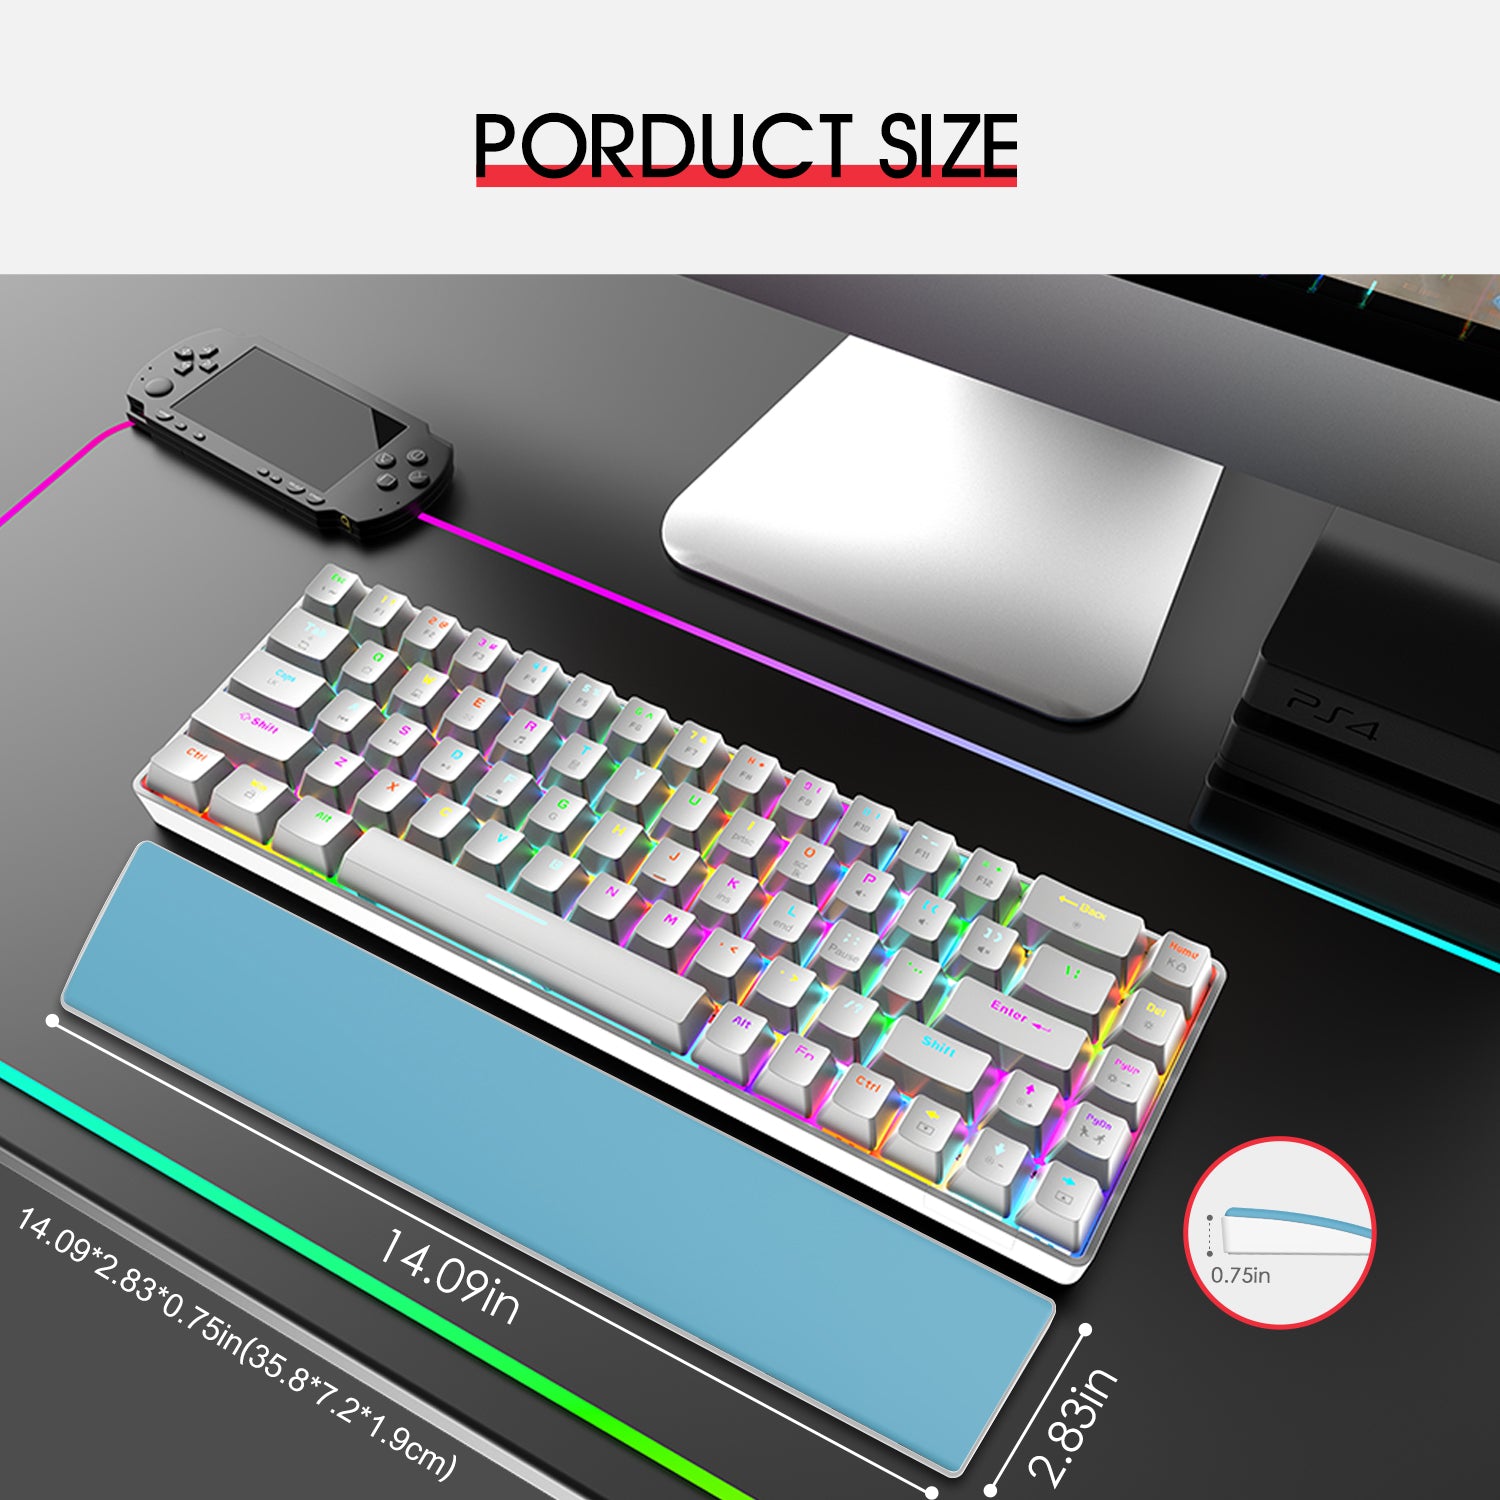 AJAZZ Wrist Rest for 65% Compact Gaming Office Mechanical Wireless Bluetooth PC Keyboard Memory Foam Ergonomic Soft Faux Leather